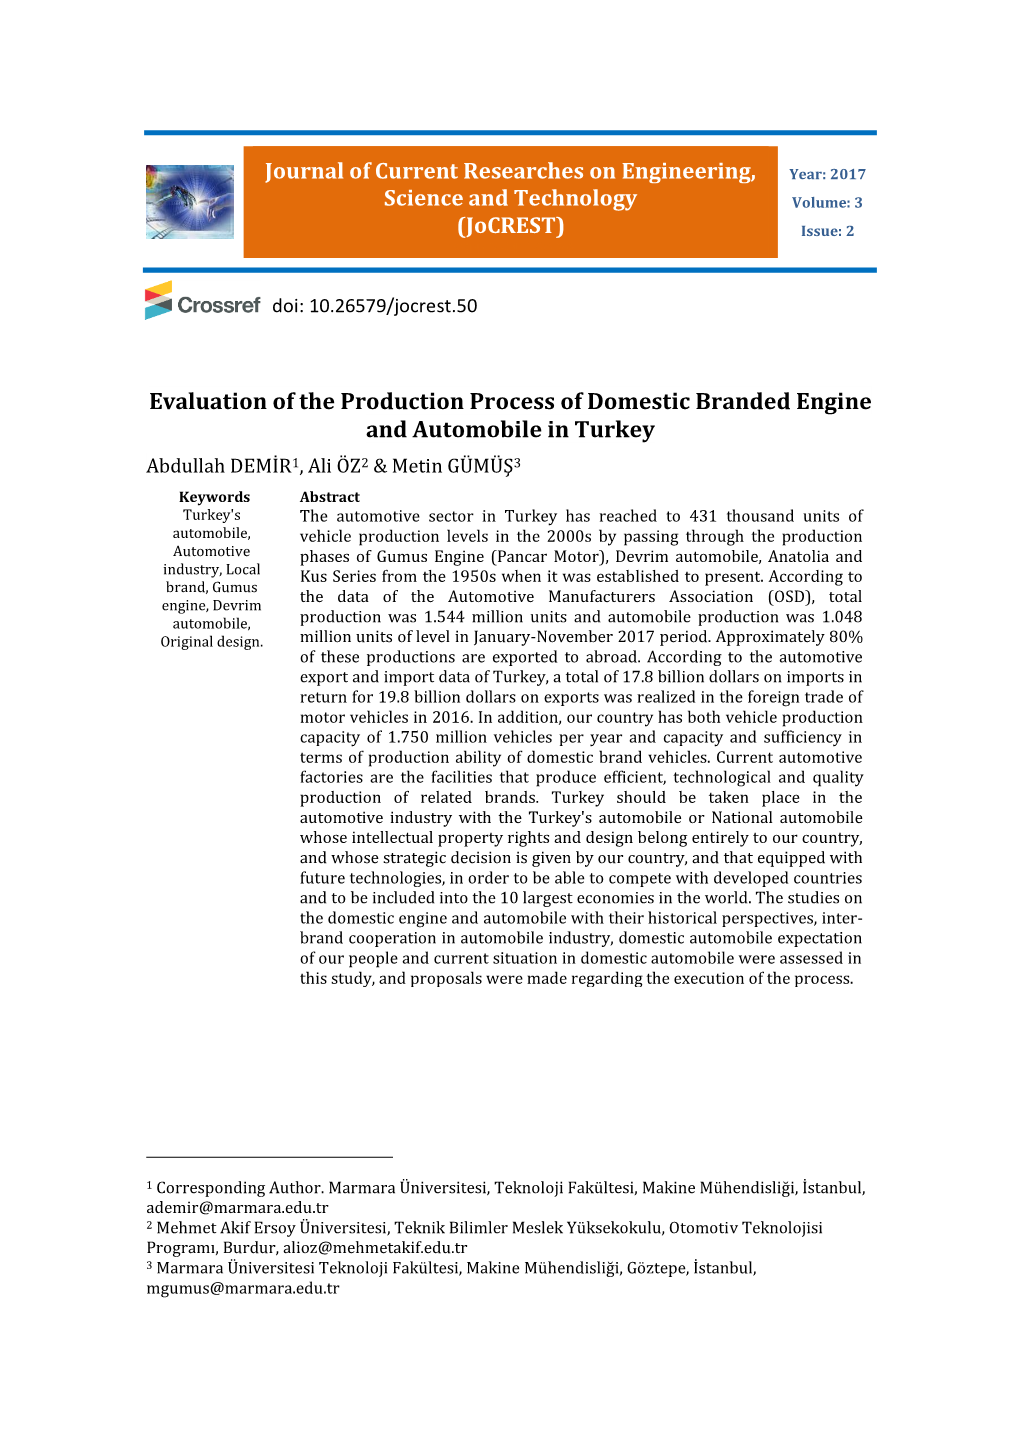 Evaluation of the Production Process of Domestic Branded Engine And